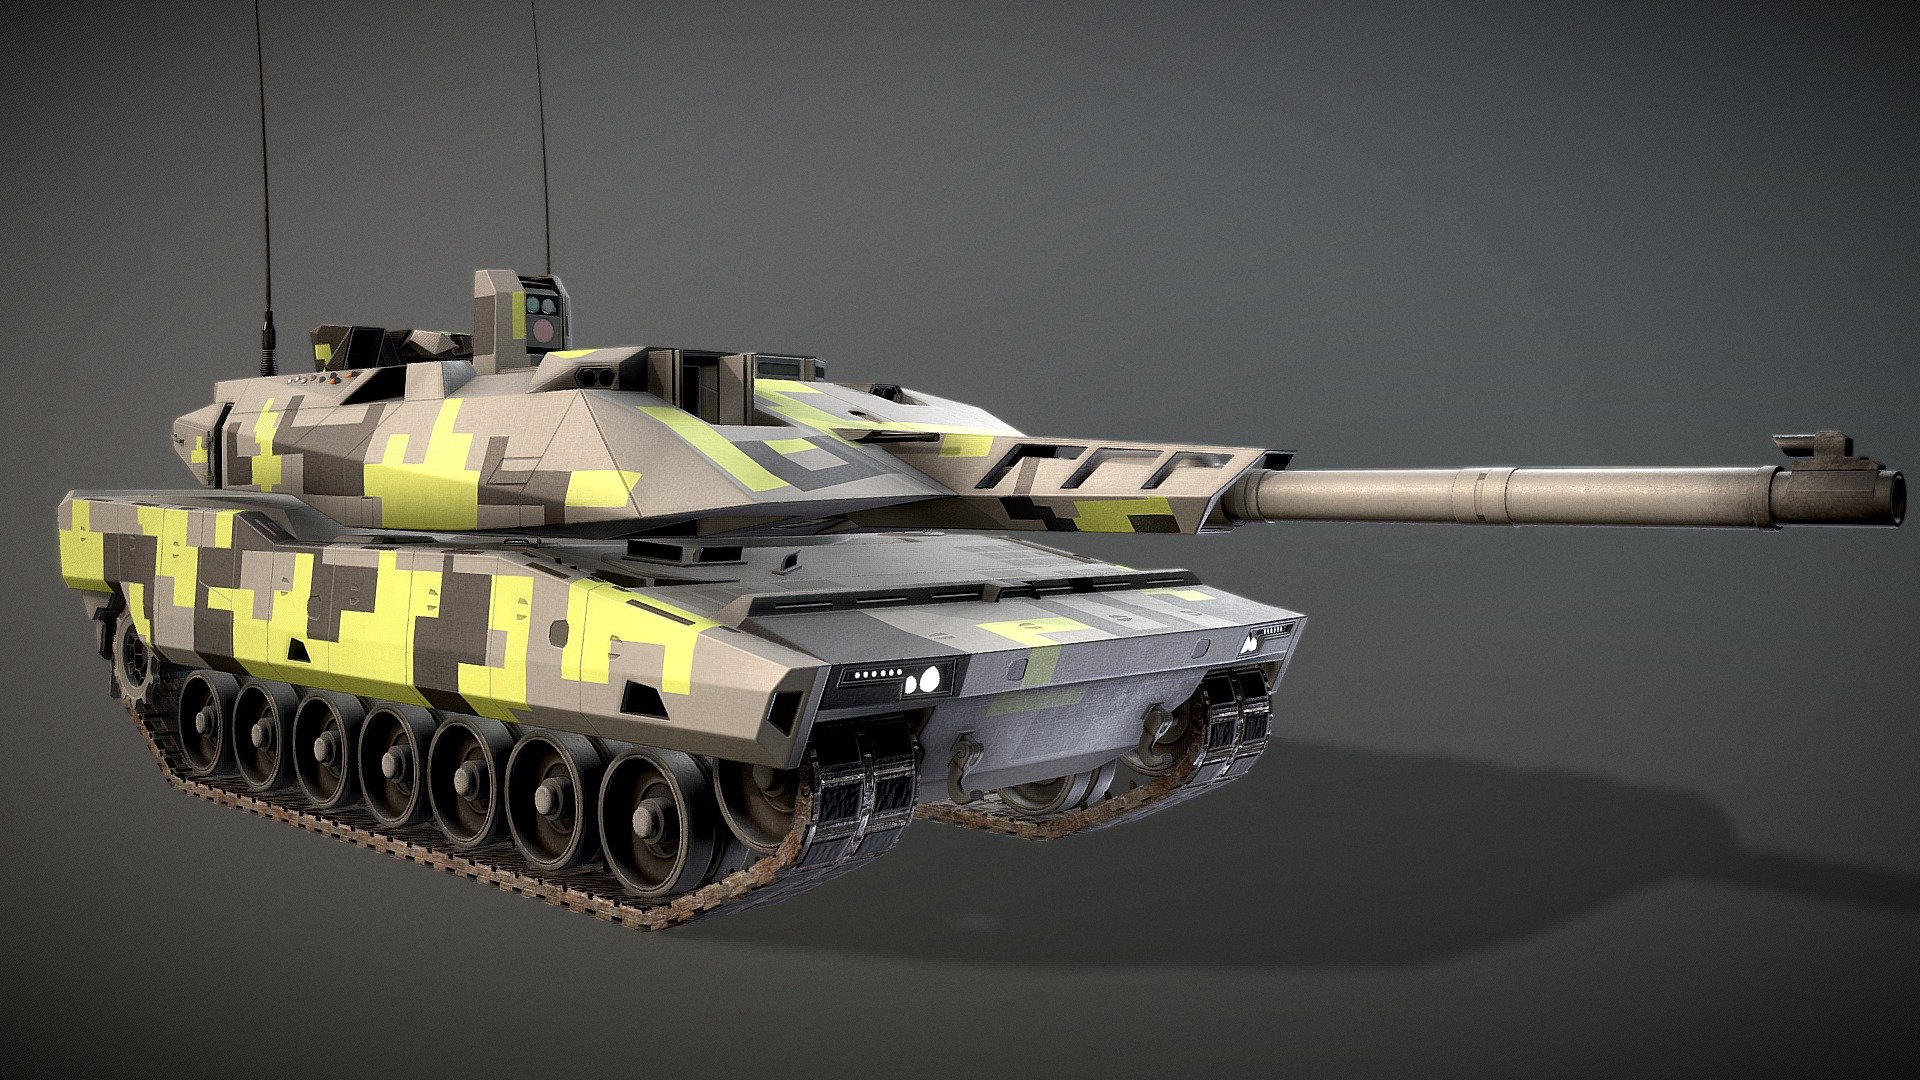 3D Model of the new KF51 Panther Panzer by Rheinmetall
Credit and link GRIP420 if you use the model somewhere/somehow.

Model + Textures by: David Falke

Website: https://www.grip420.com/

Discord: Follow us on Discord

Facebook Follow us on Facebook

This model is not for re-sell. You can use it in commerical products, but credit us 3d model